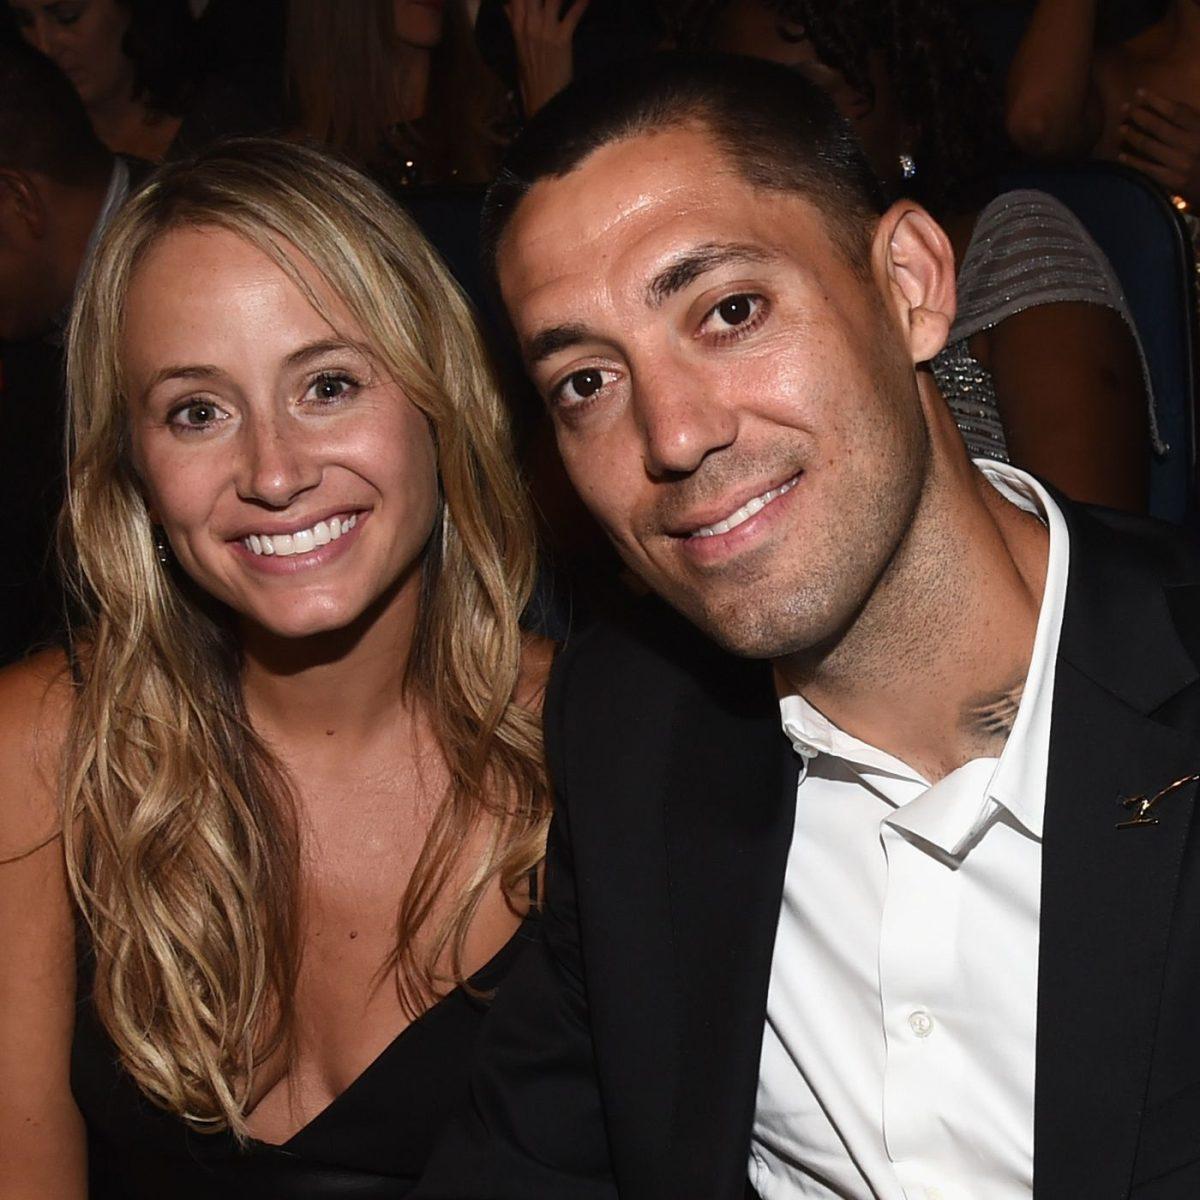 Photo of About Clint Dempsey and Clint Dempsey’s Wife